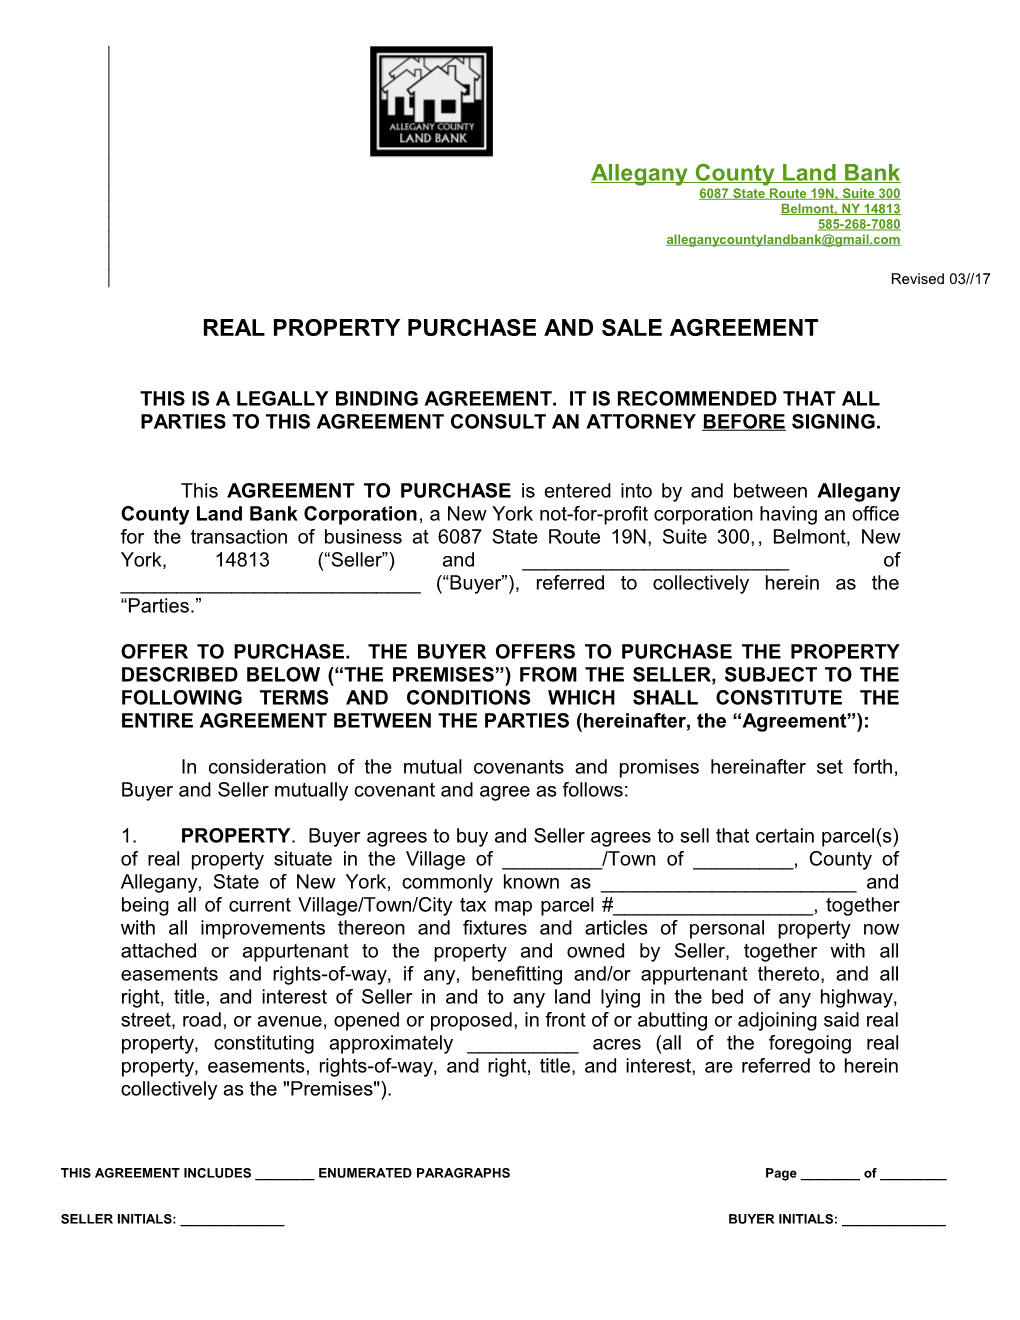 Real Property Purchaseand Sale Agreement